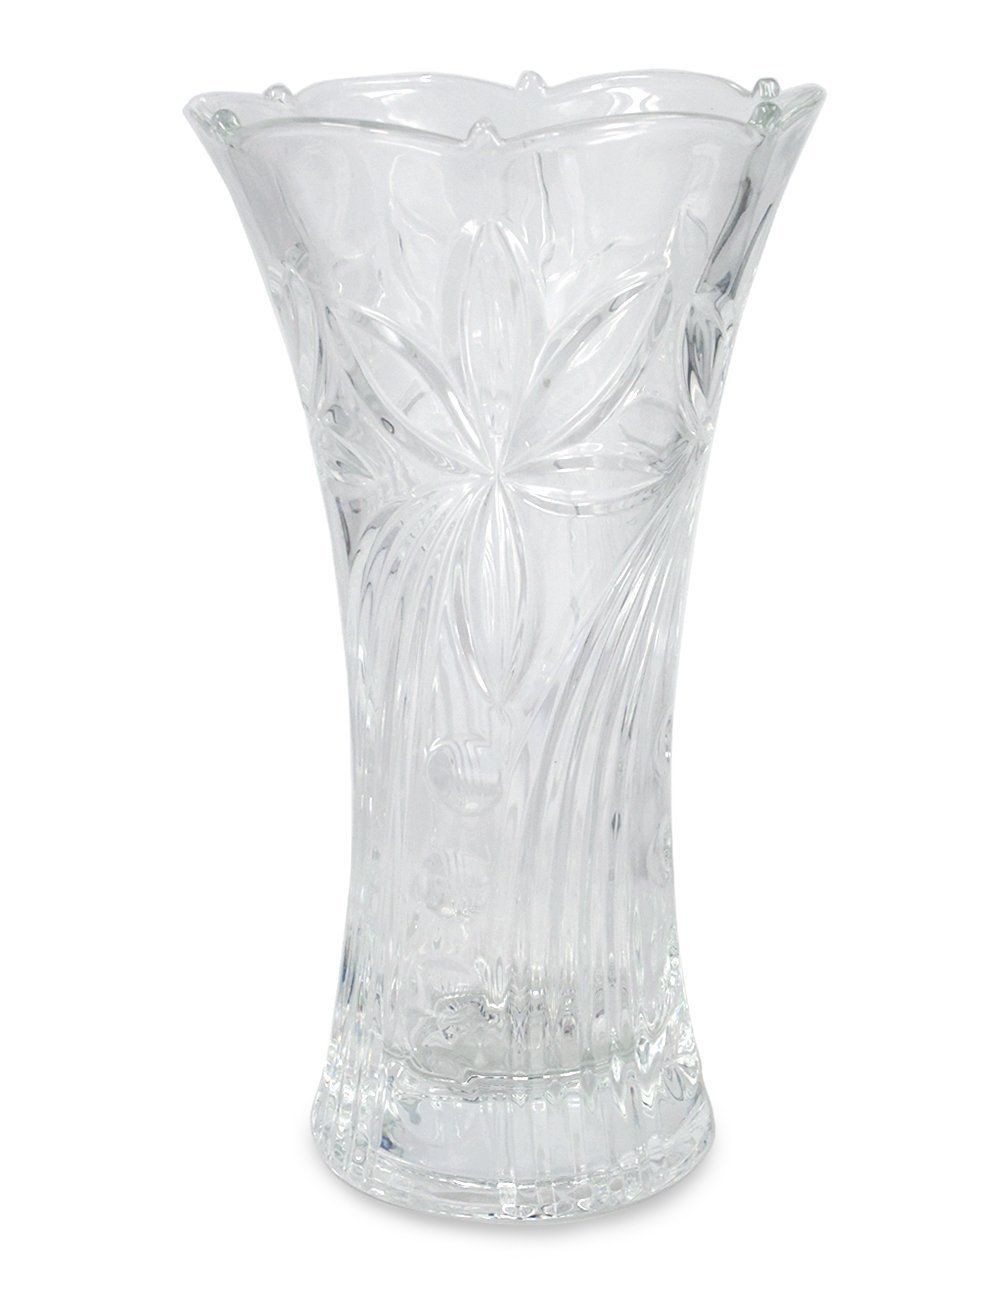 13 attractive 24 Inch Glass Vase 2024 free download 24 inch glass vase of dahlia poinsettia swirl glass vase decorative flower arrangement in dahlia poinsettia swirl glass vase decorative flower arrangement for home wedding christmas